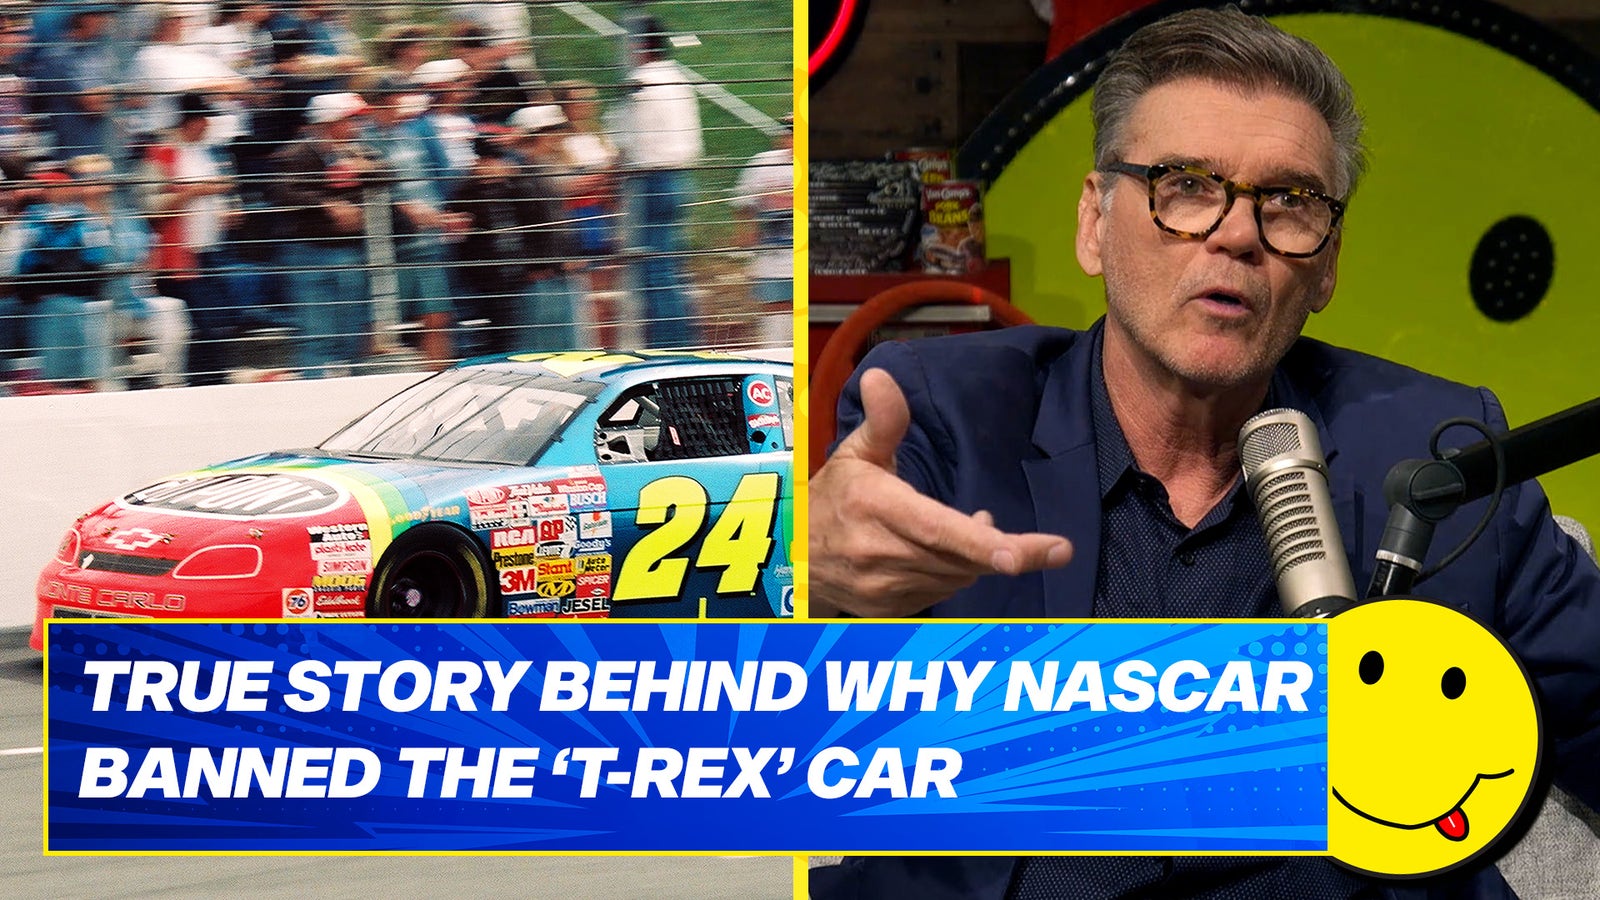 The truth behind a car that was so fast NASCAR banned it